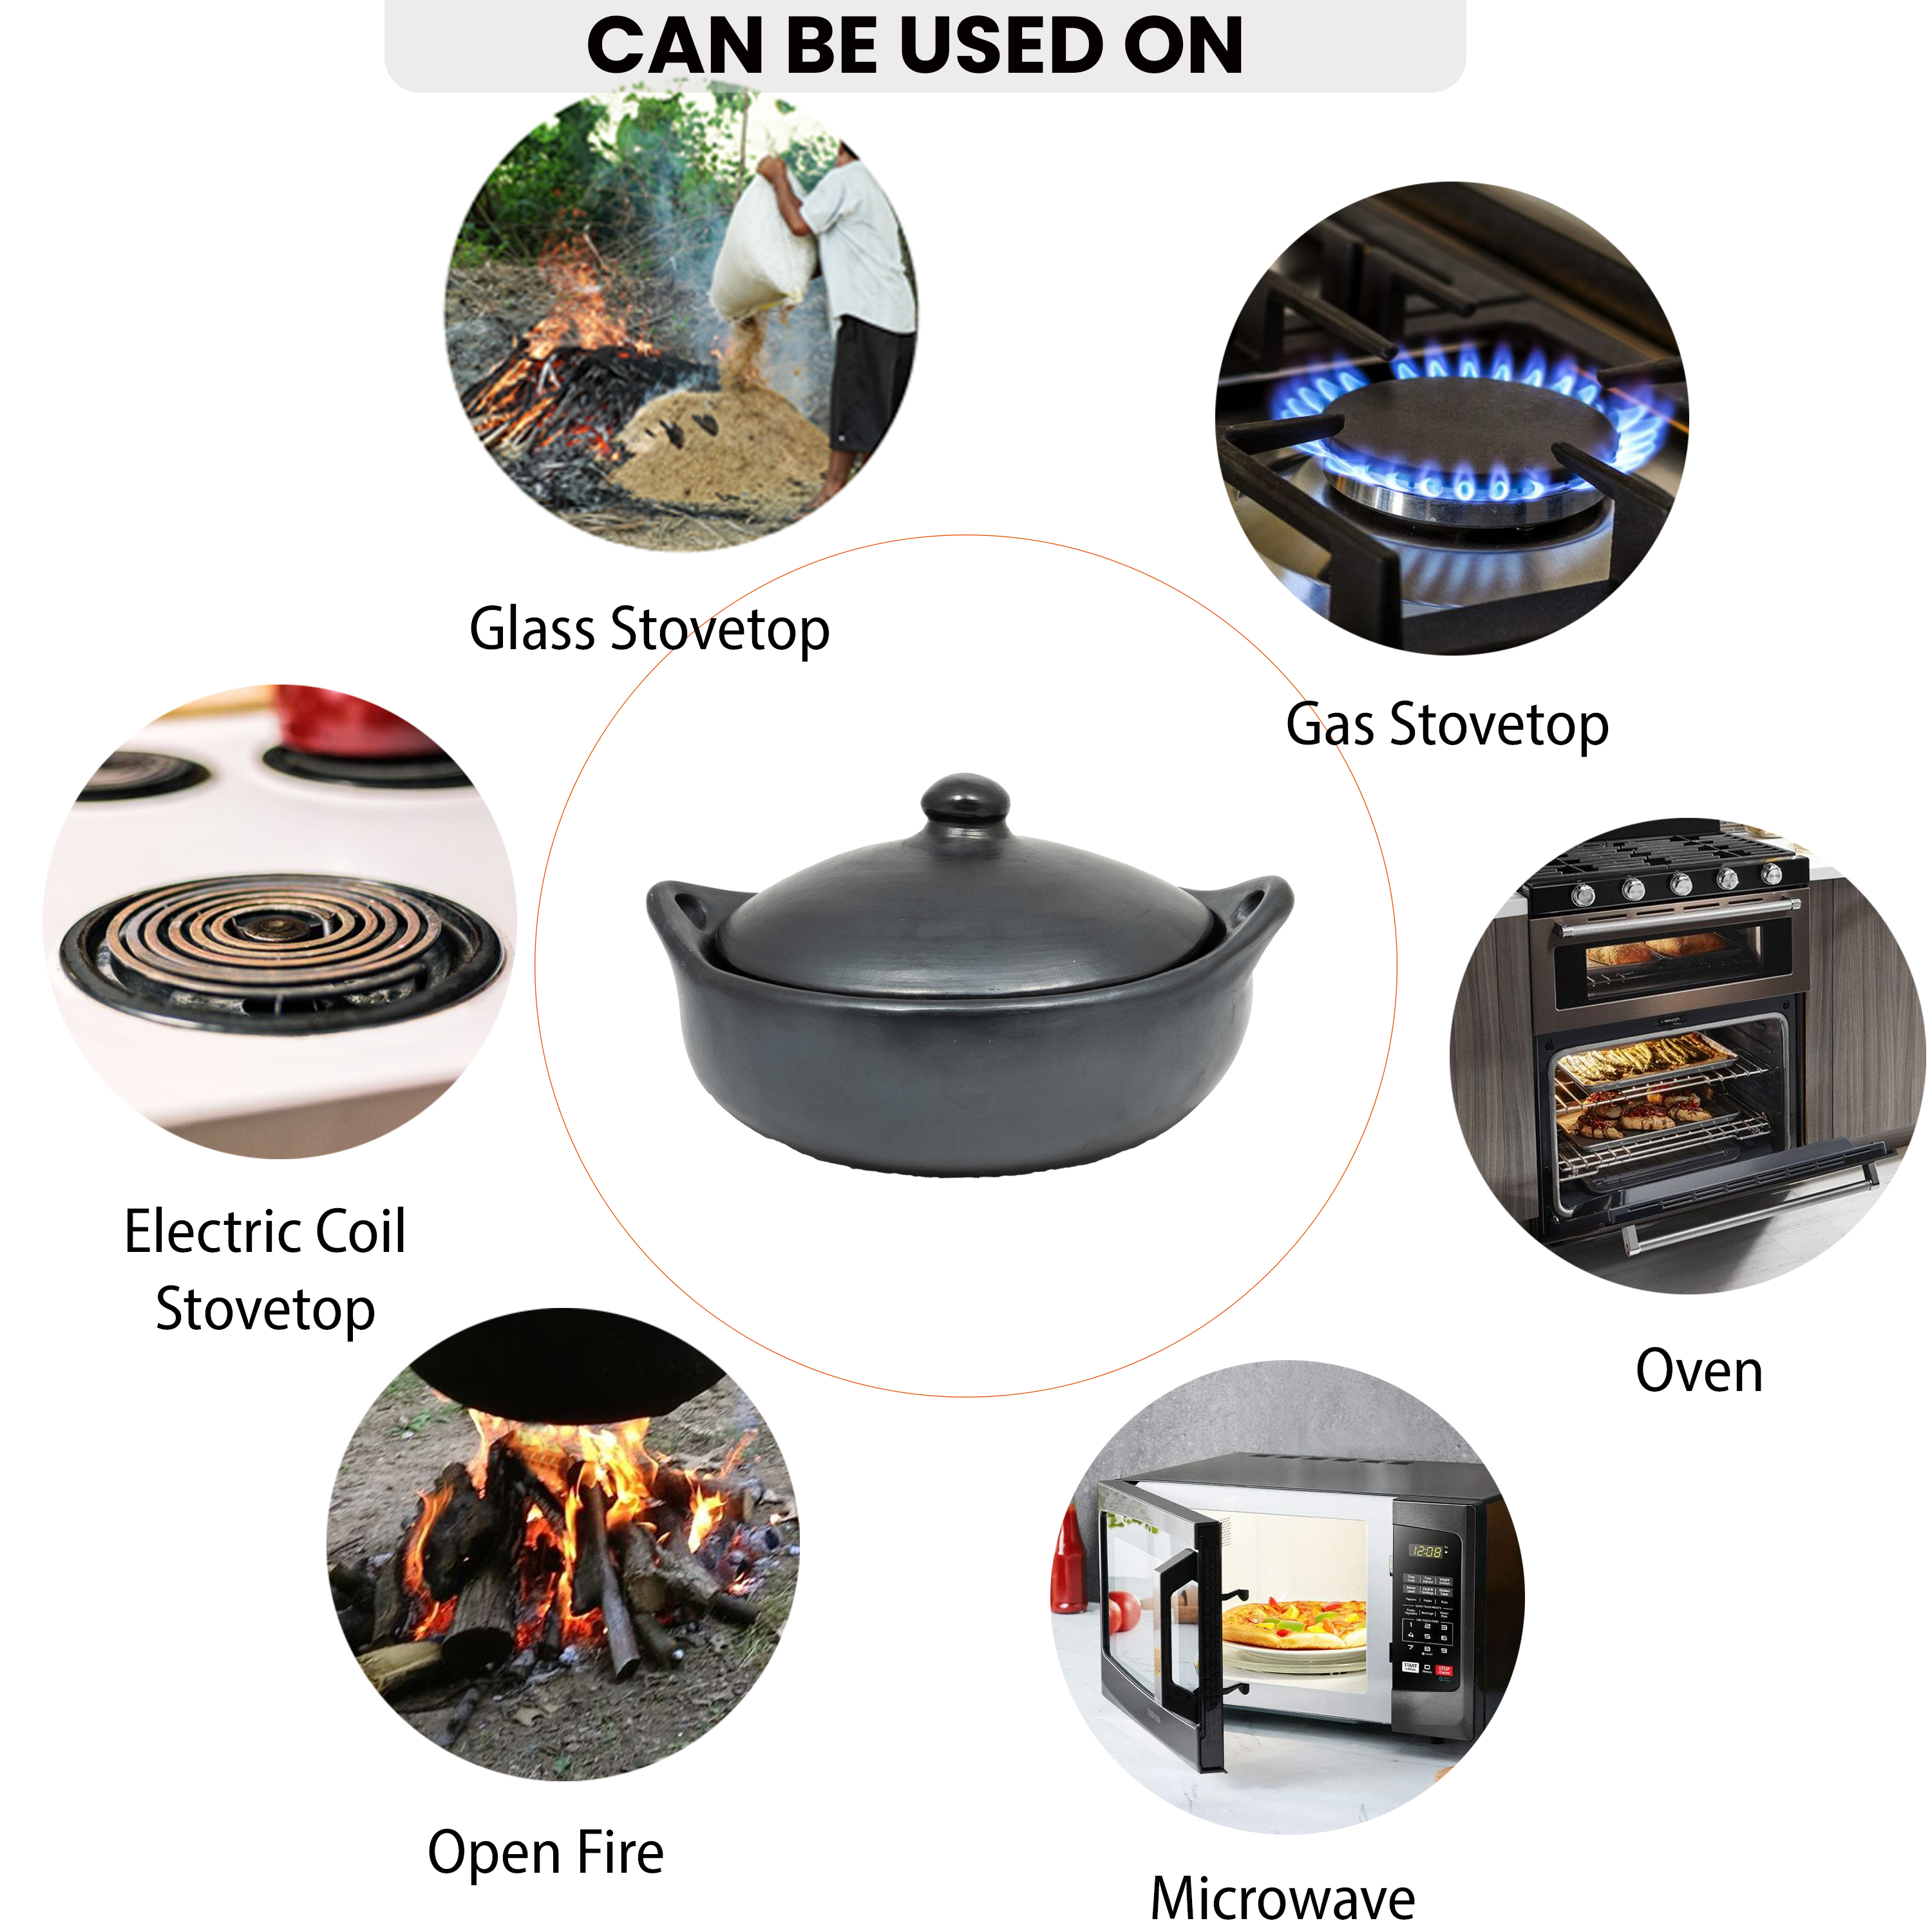 https://ancientcookware.com/images/stories/virtuemart/product/col_1012_used_on.jpg